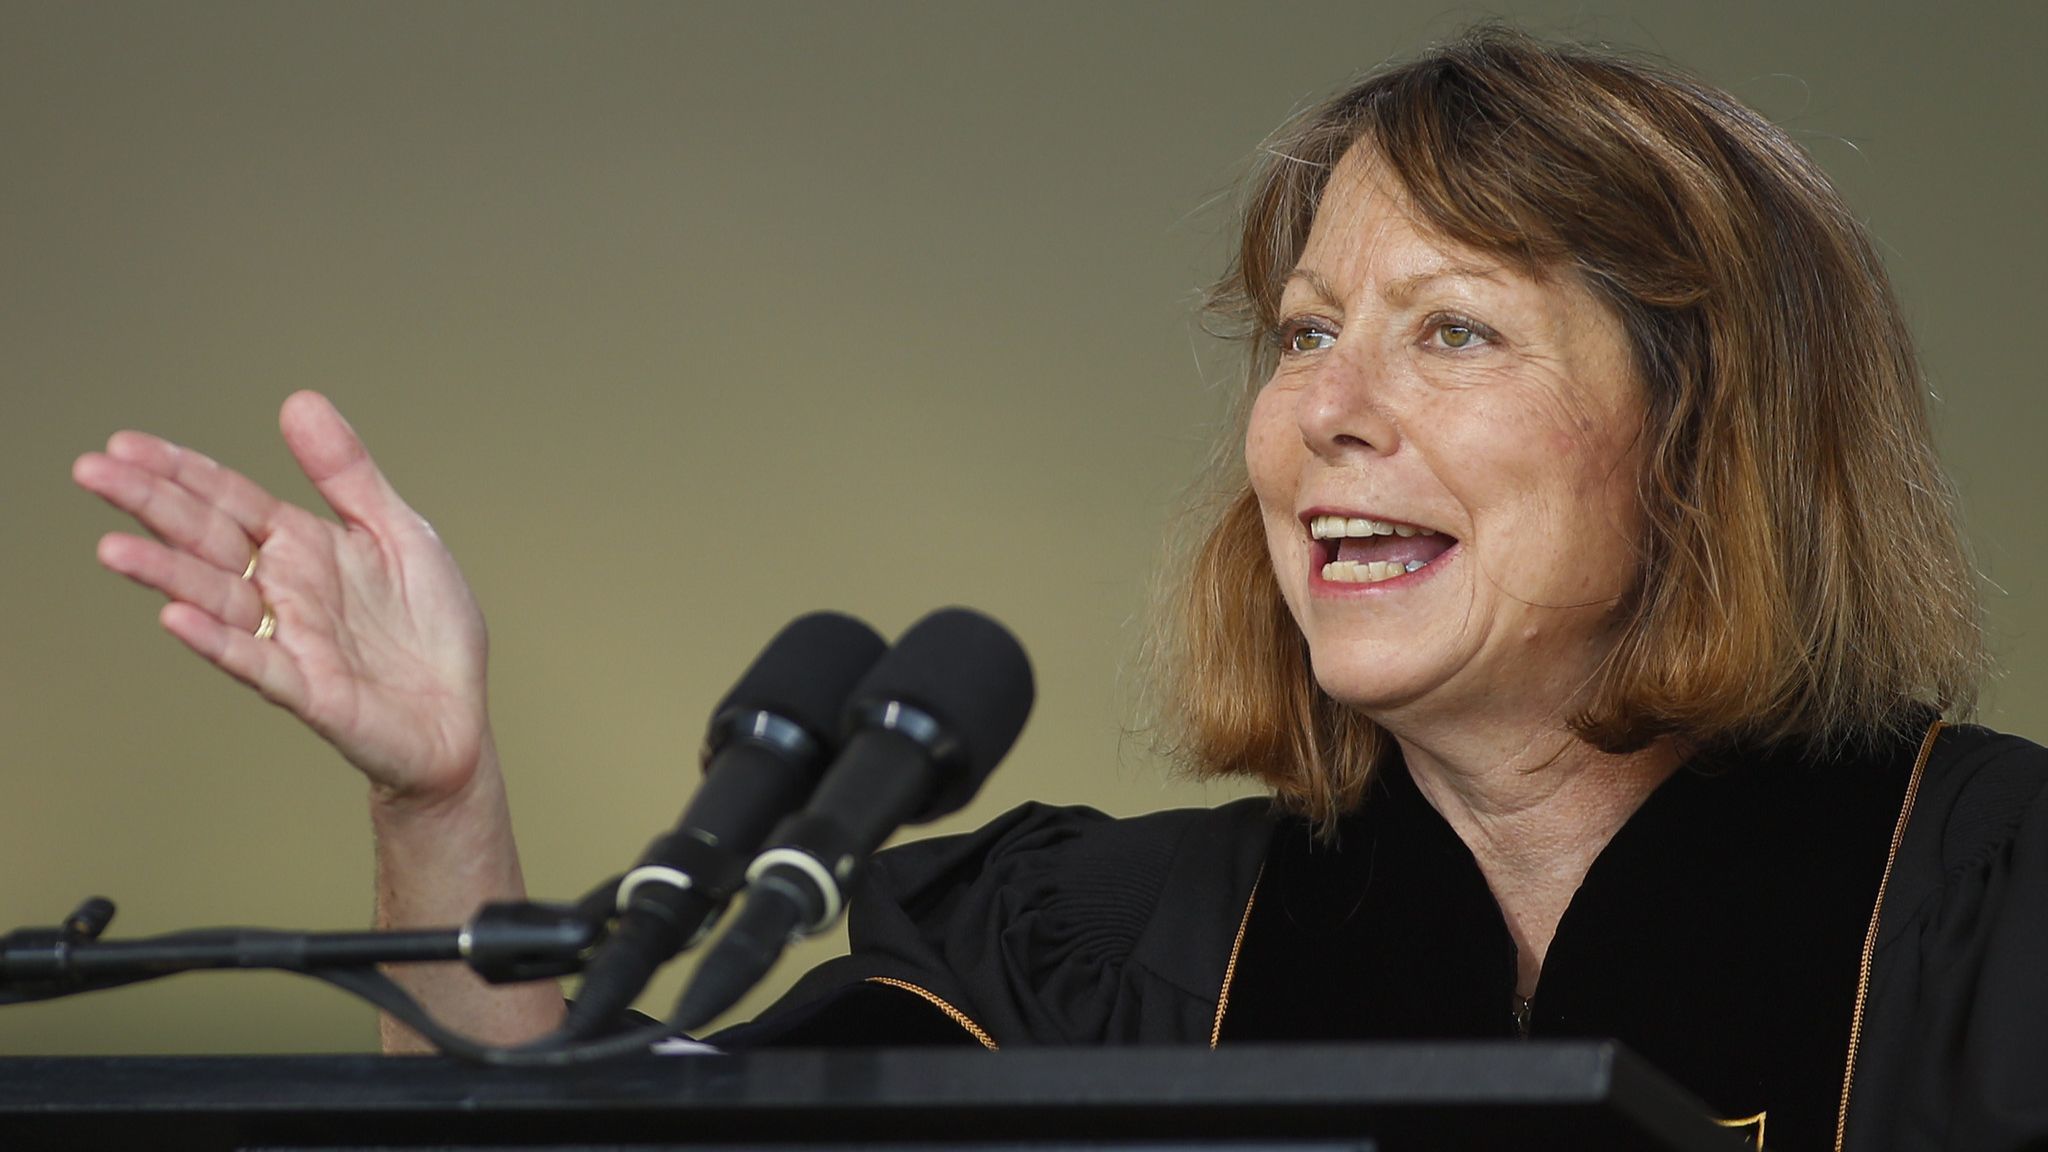 Another reporter alleges ex-New York Times editor Jill Abramson lifted material for her book